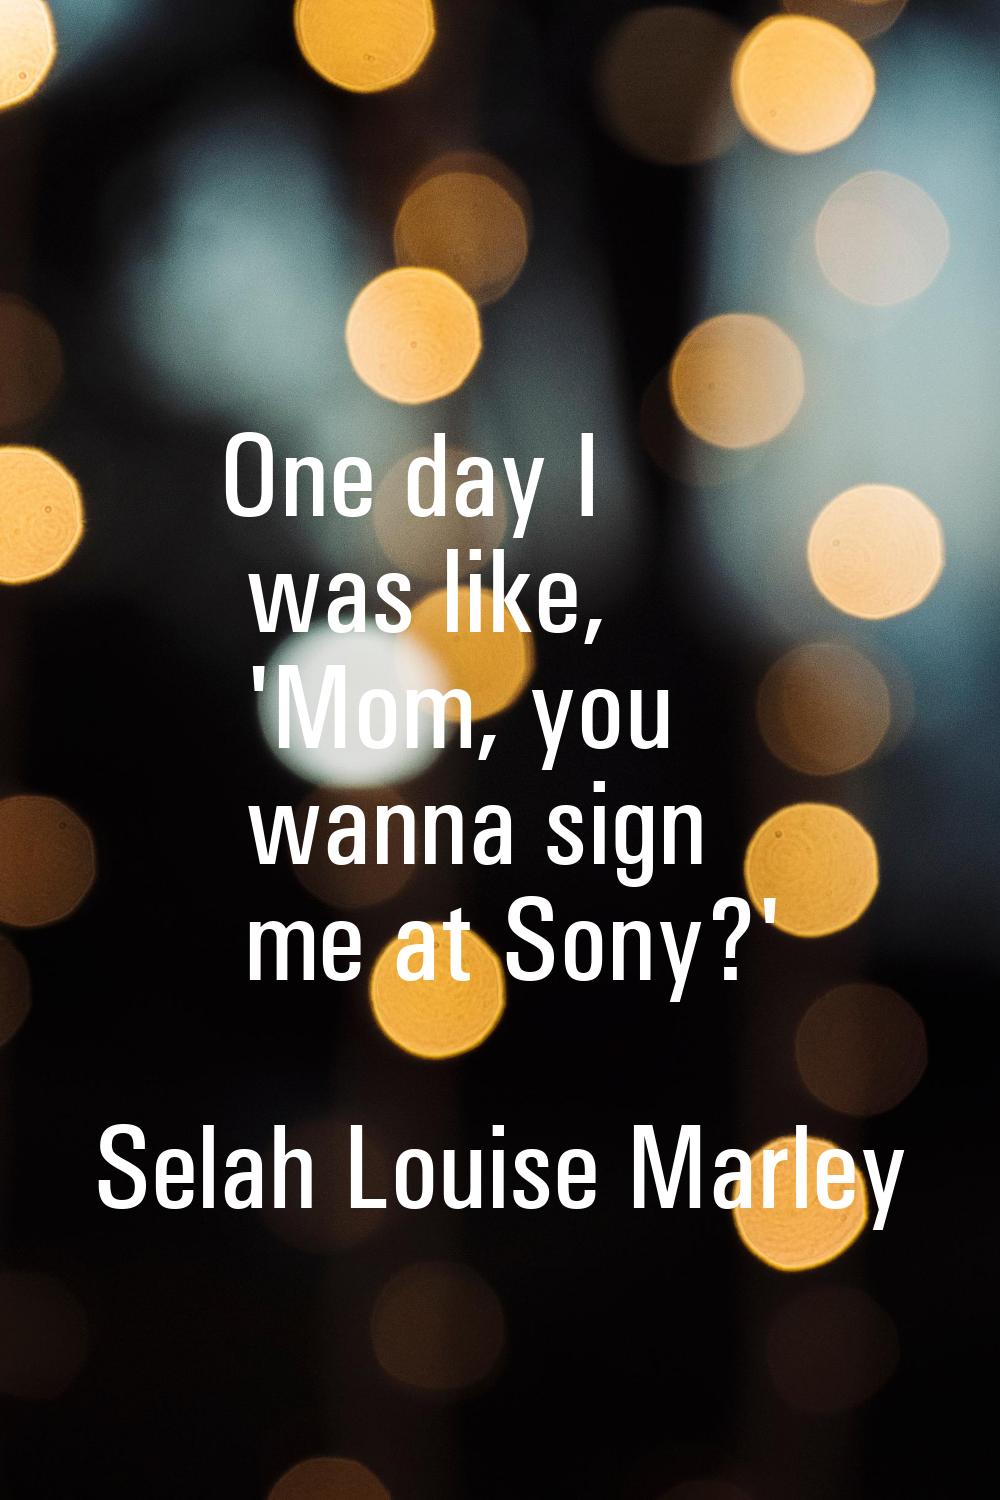 One day I was like, 'Mom, you wanna sign me at Sony?'